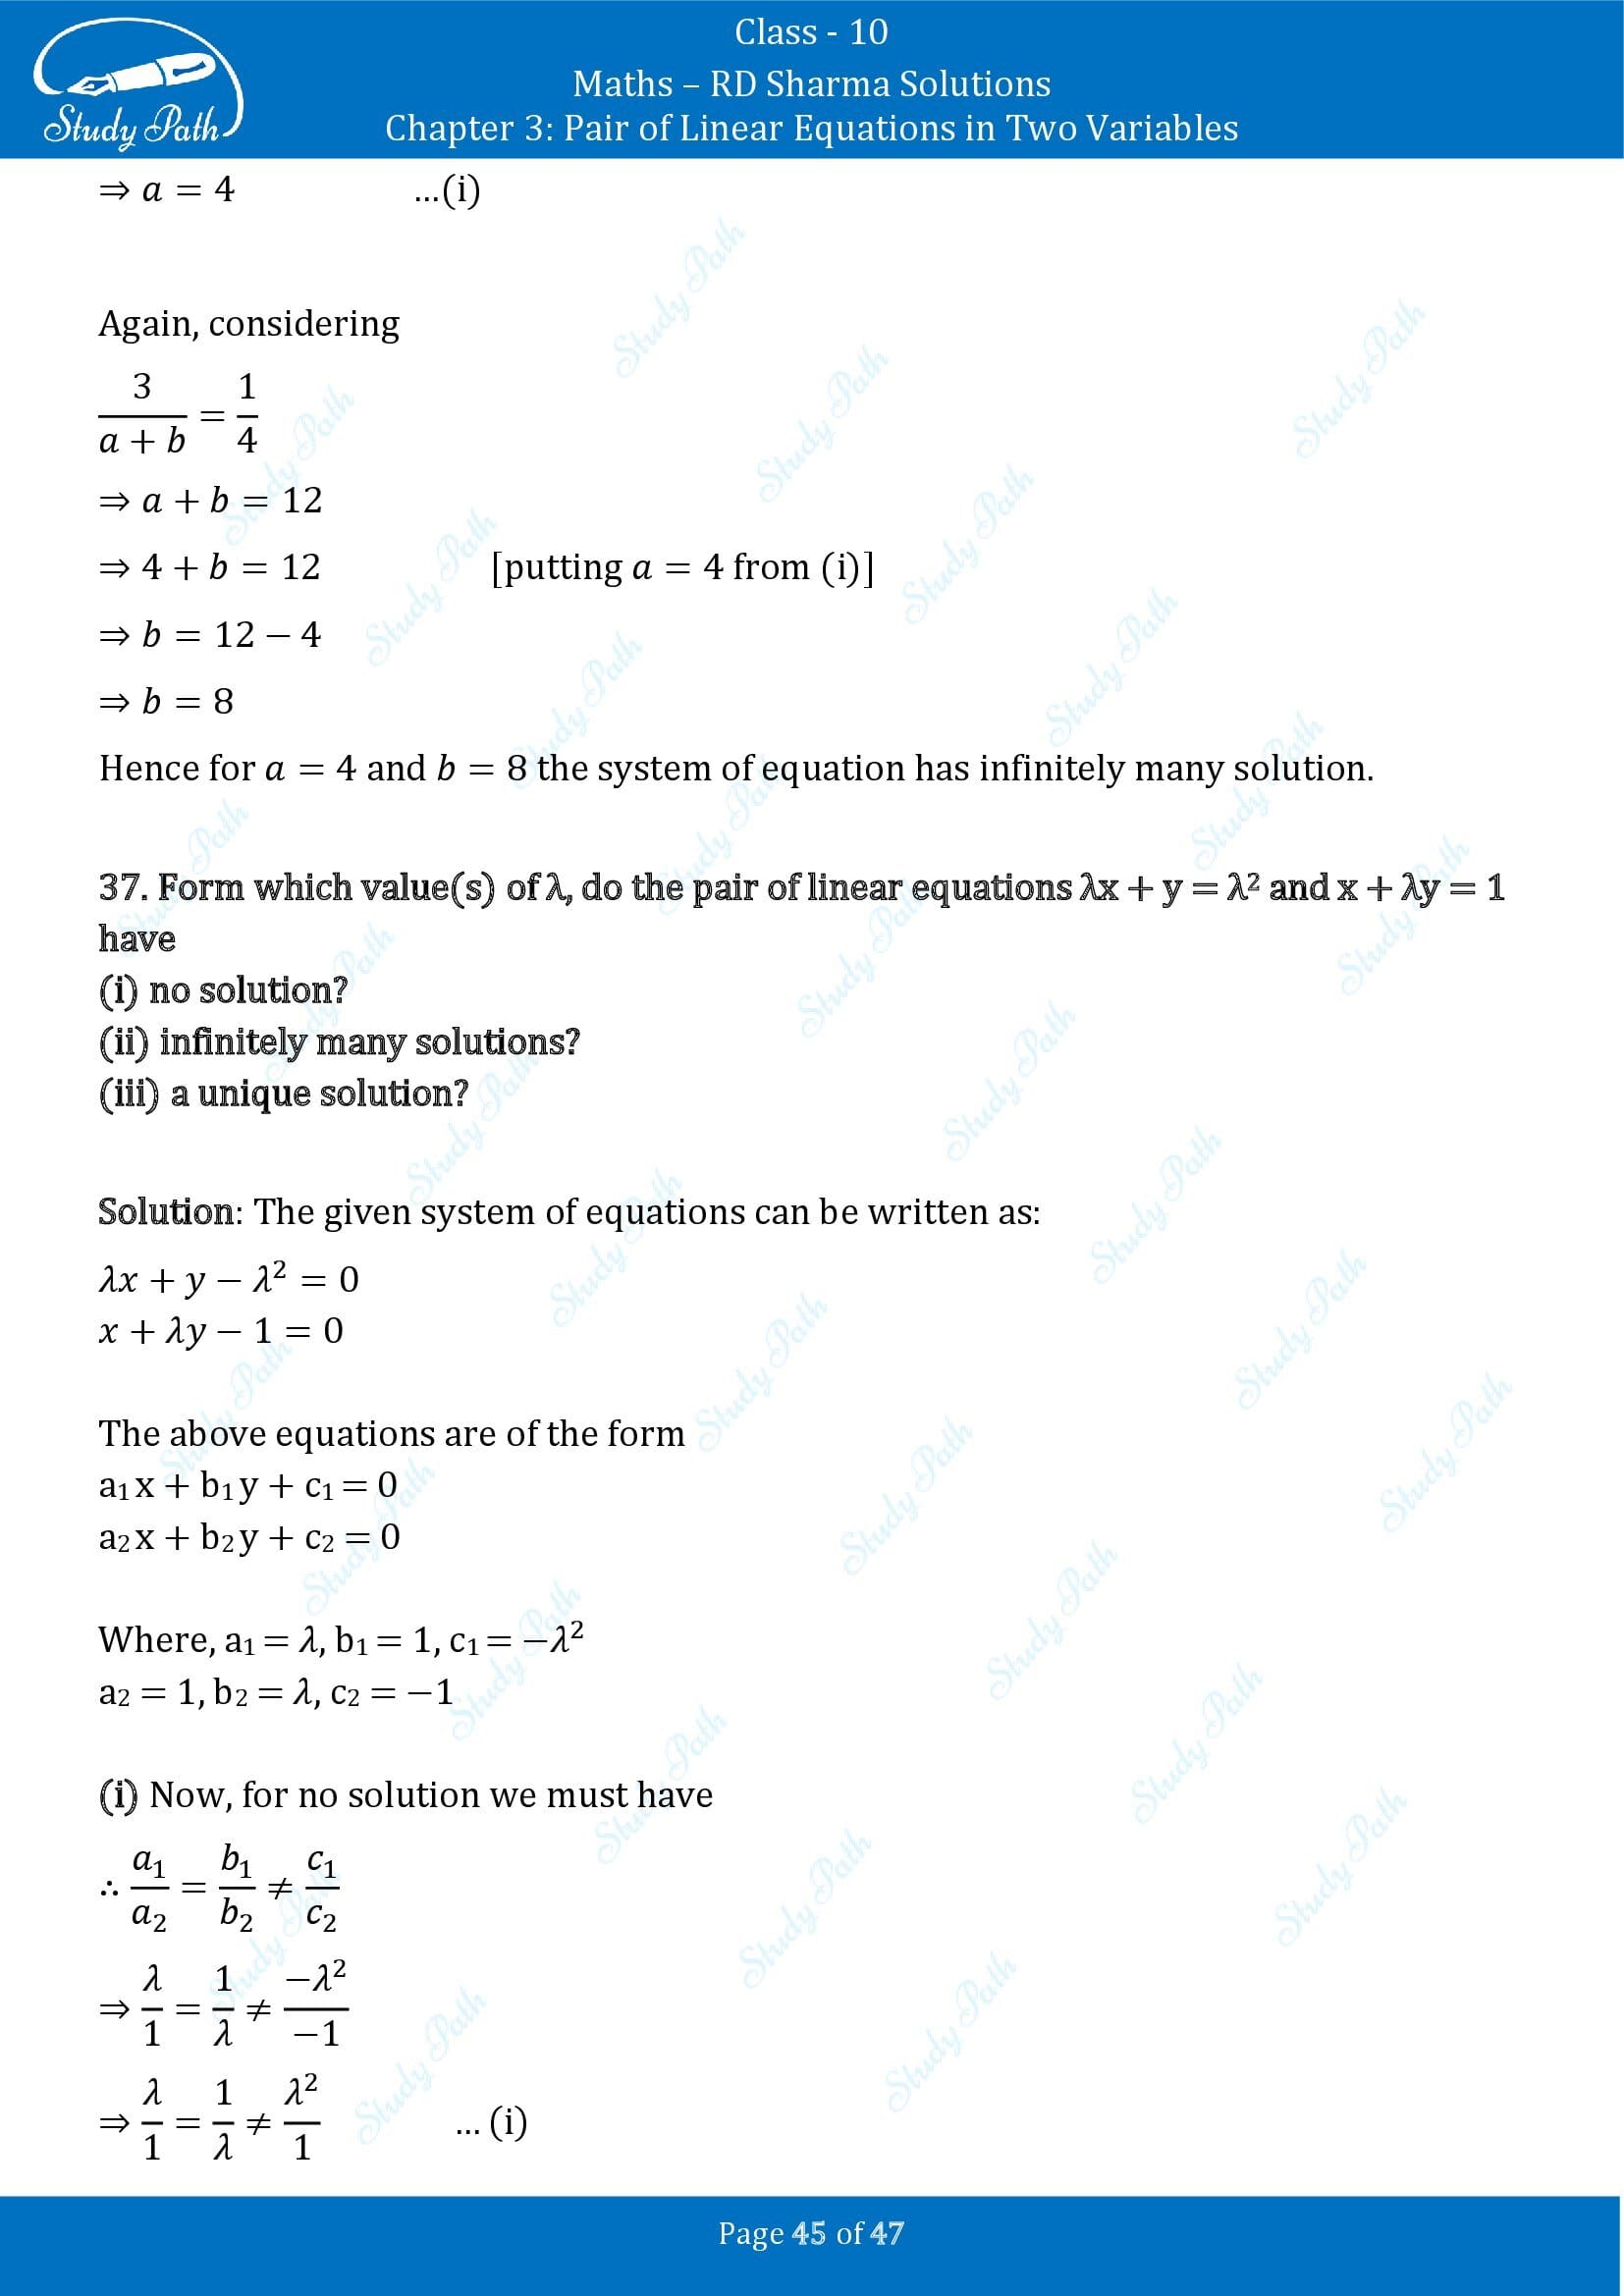 RD Sharma Solutions Class 10 Chapter 3 Pair of Linear Equations in Two Variables Exercise 3.5 00045